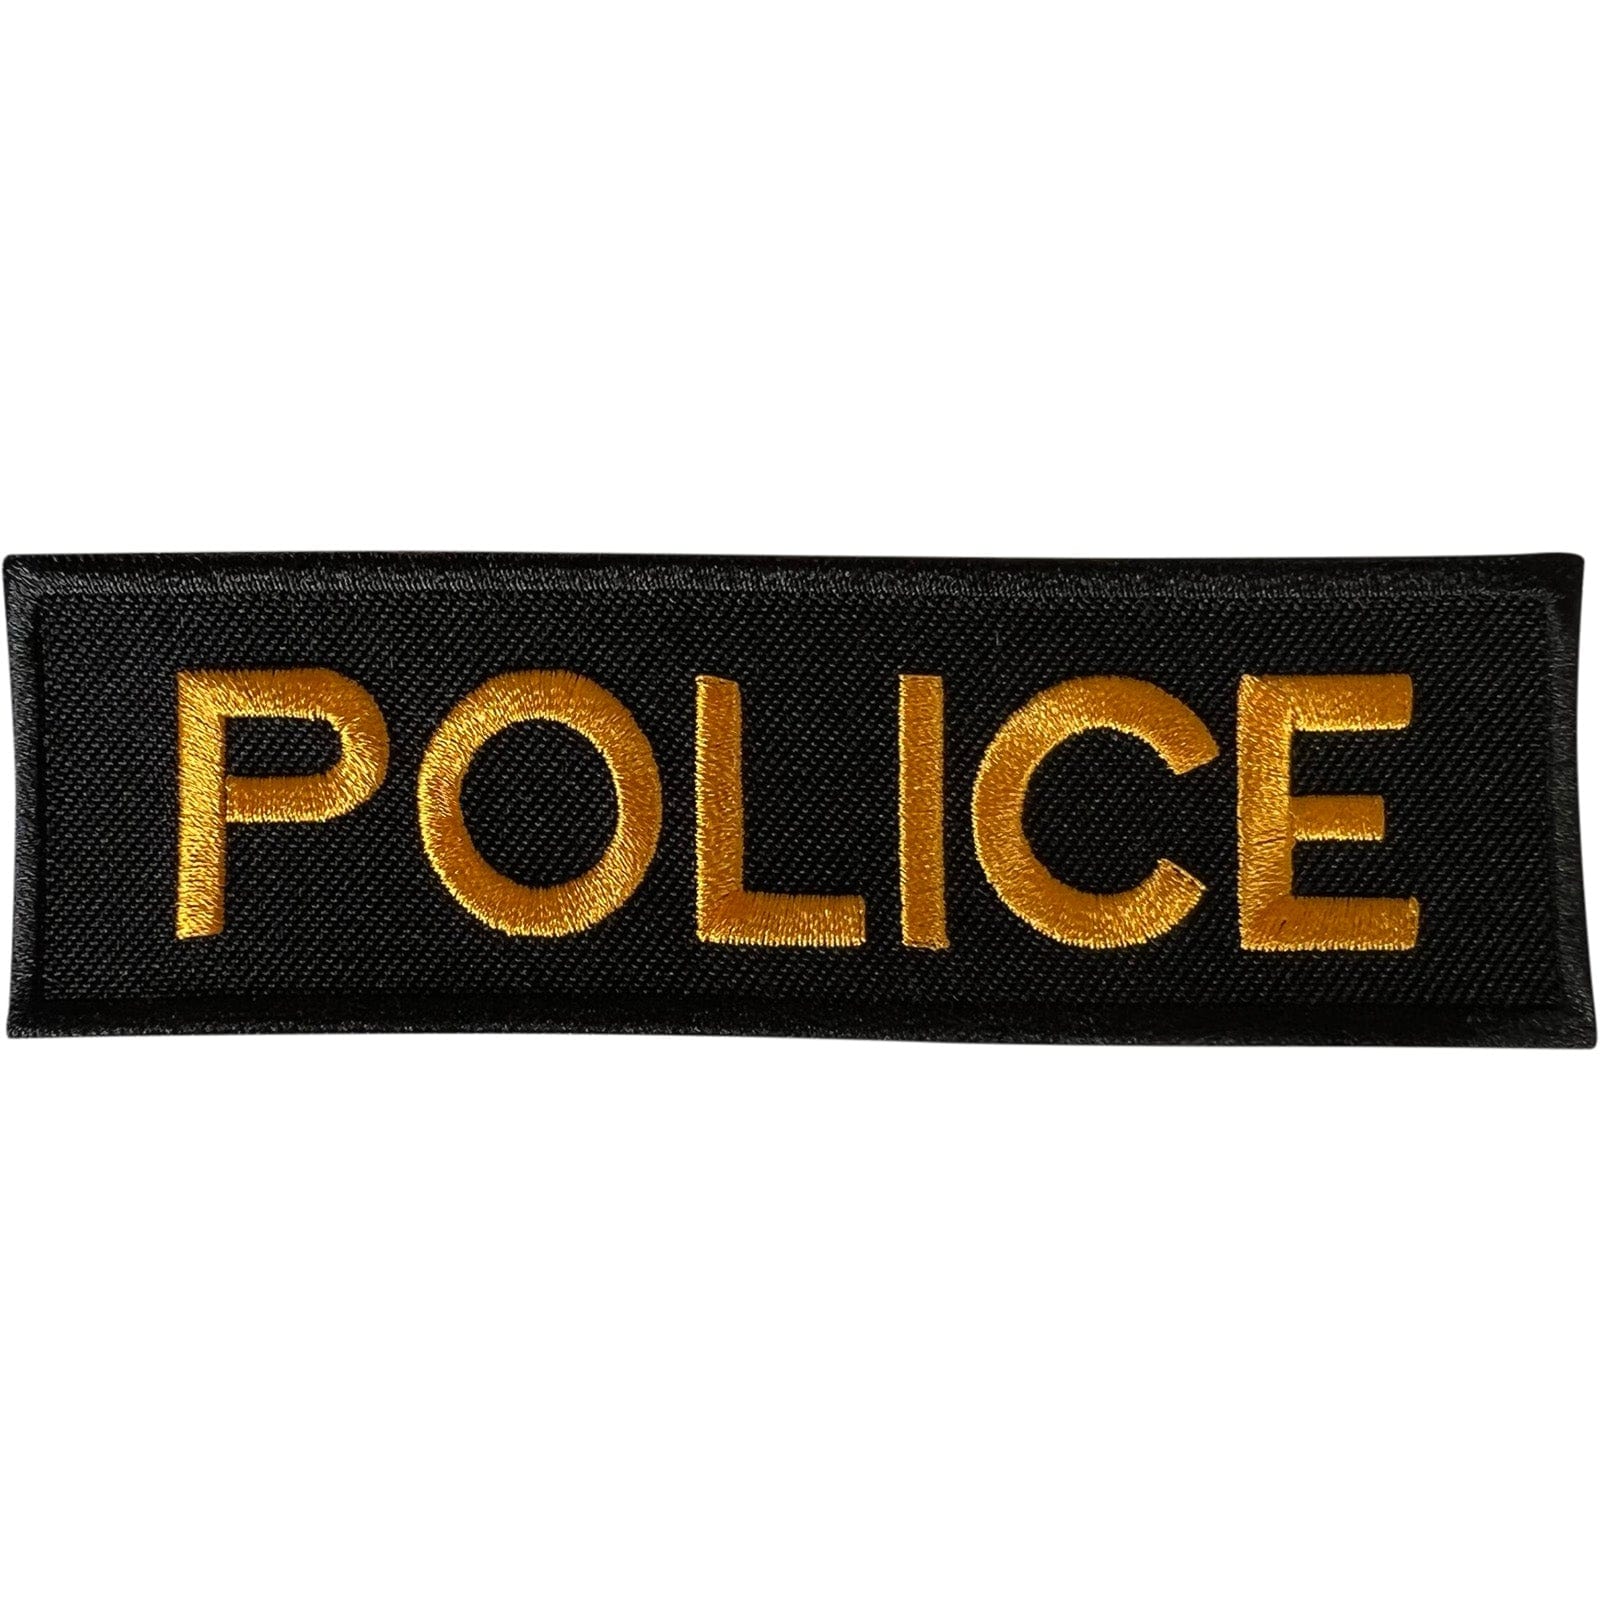 Police Patch Iron Sew On Clothes Embroidered Badge Policeman Officer Fancy Dress